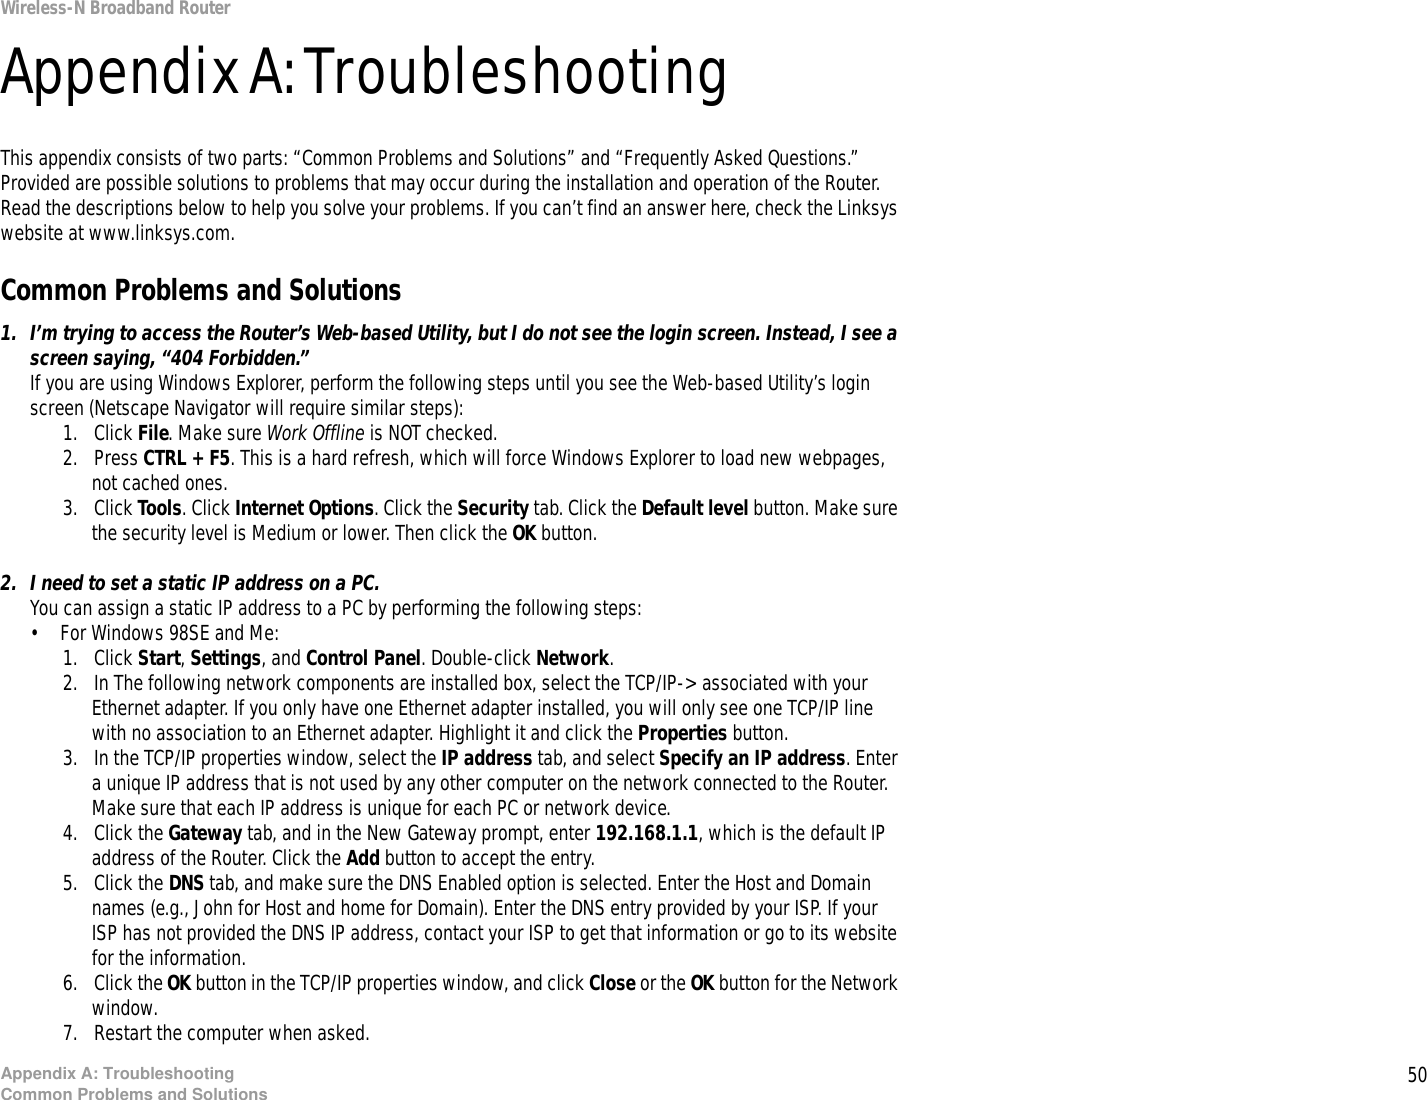 50Appendix A: TroubleshootingCommon Problems and SolutionsWireless-N Broadband RouterAppendix A: TroubleshootingThis appendix consists of two parts: “Common Problems and Solutions” and “Frequently Asked Questions.” Provided are possible solutions to problems that may occur during the installation and operation of the Router. Read the descriptions below to help you solve your problems. If you can’t find an answer here, check the Linksys website at www.linksys.com.Common Problems and Solutions1. I’m trying to access the Router’s Web-based Utility, but I do not see the login screen. Instead, I see a screen saying, “404 Forbidden.”If you are using Windows Explorer, perform the following steps until you see the Web-based Utility’s login screen (Netscape Navigator will require similar steps):1. Click File. Make sure Work Offline is NOT checked.2. Press CTRL + F5. This is a hard refresh, which will force Windows Explorer to load new webpages, not cached ones.3. Click Tools. Click Internet Options. Click the Security tab. Click the Default level button. Make sure the security level is Medium or lower. Then click the OK button.2. I need to set a static IP address on a PC.You can assign a static IP address to a PC by performing the following steps:• For Windows 98SE and Me:1. Click Start, Settings, and Control Panel. Double-click Network.2. In The following network components are installed box, select the TCP/IP-&gt; associated with your Ethernet adapter. If you only have one Ethernet adapter installed, you will only see one TCP/IP line with no association to an Ethernet adapter. Highlight it and click the Properties button.3. In the TCP/IP properties window, select the IP address tab, and select Specify an IP address. Enter a unique IP address that is not used by any other computer on the network connected to the Router. Make sure that each IP address is unique for each PC or network device.4. Click the Gateway tab, and in the New Gateway prompt, enter 192.168.1.1, which is the default IP address of the Router. Click the Add button to accept the entry.5. Click the DNS tab, and make sure the DNS Enabled option is selected. Enter the Host and Domain names (e.g., John for Host and home for Domain). Enter the DNS entry provided by your ISP. If your ISP has not provided the DNS IP address, contact your ISP to get that information or go to its website for the information.6. Click the OK button in the TCP/IP properties window, and click Close or the OK button for the Network window.7. Restart the computer when asked.